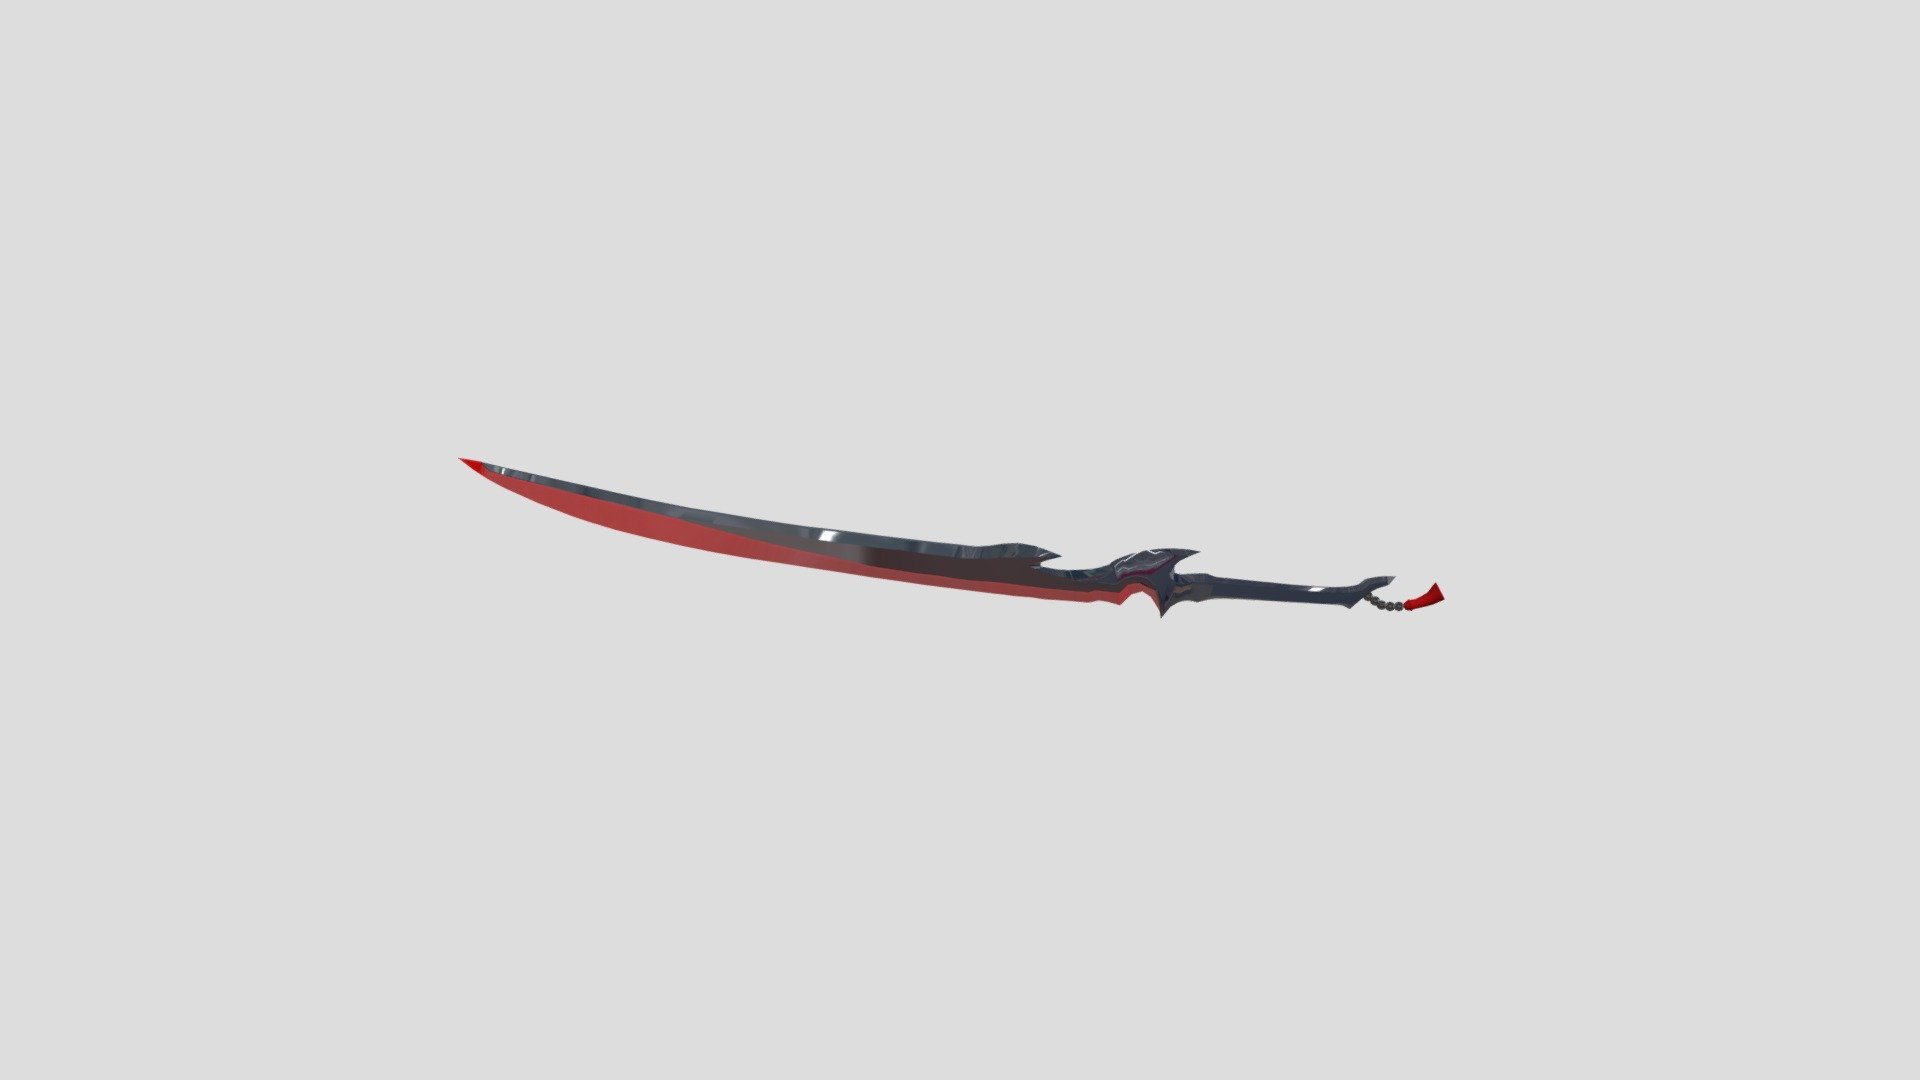 Made a sword from League of legends character Yone. I haven't learned about zbrush or blender yet so im using Maya. I'm struggling on coloring and details to its original style so I just went and tried a simple color 3d model